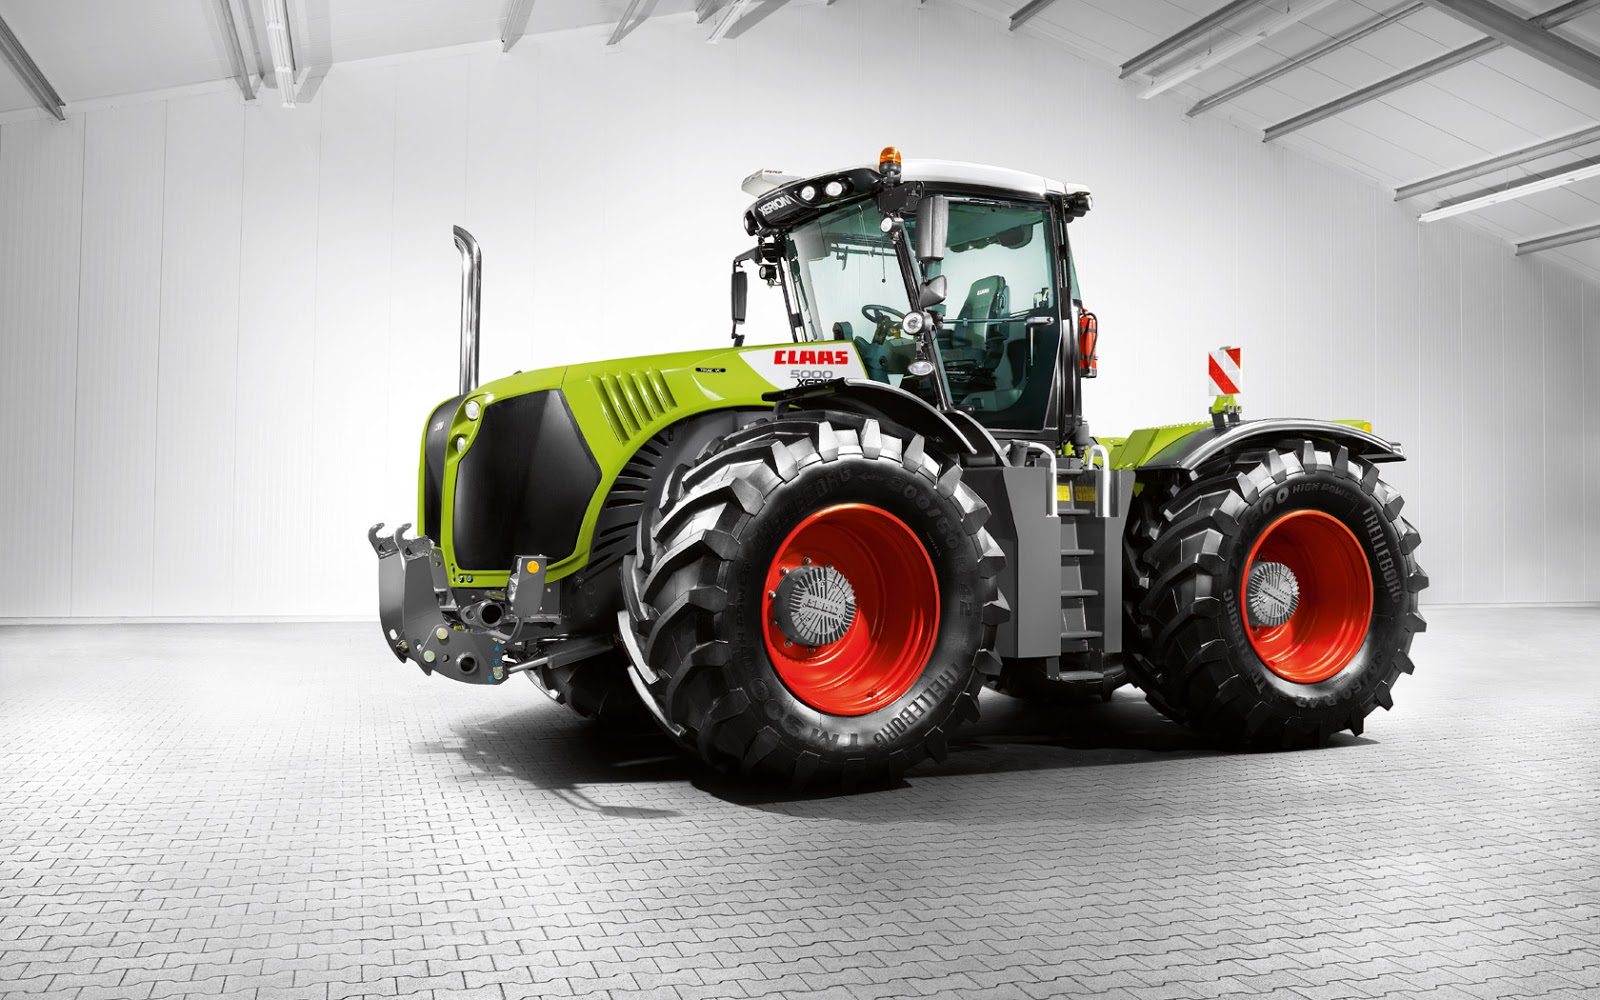 Lime green appears to be a favourite LEGO tractor colour. Lime green ...